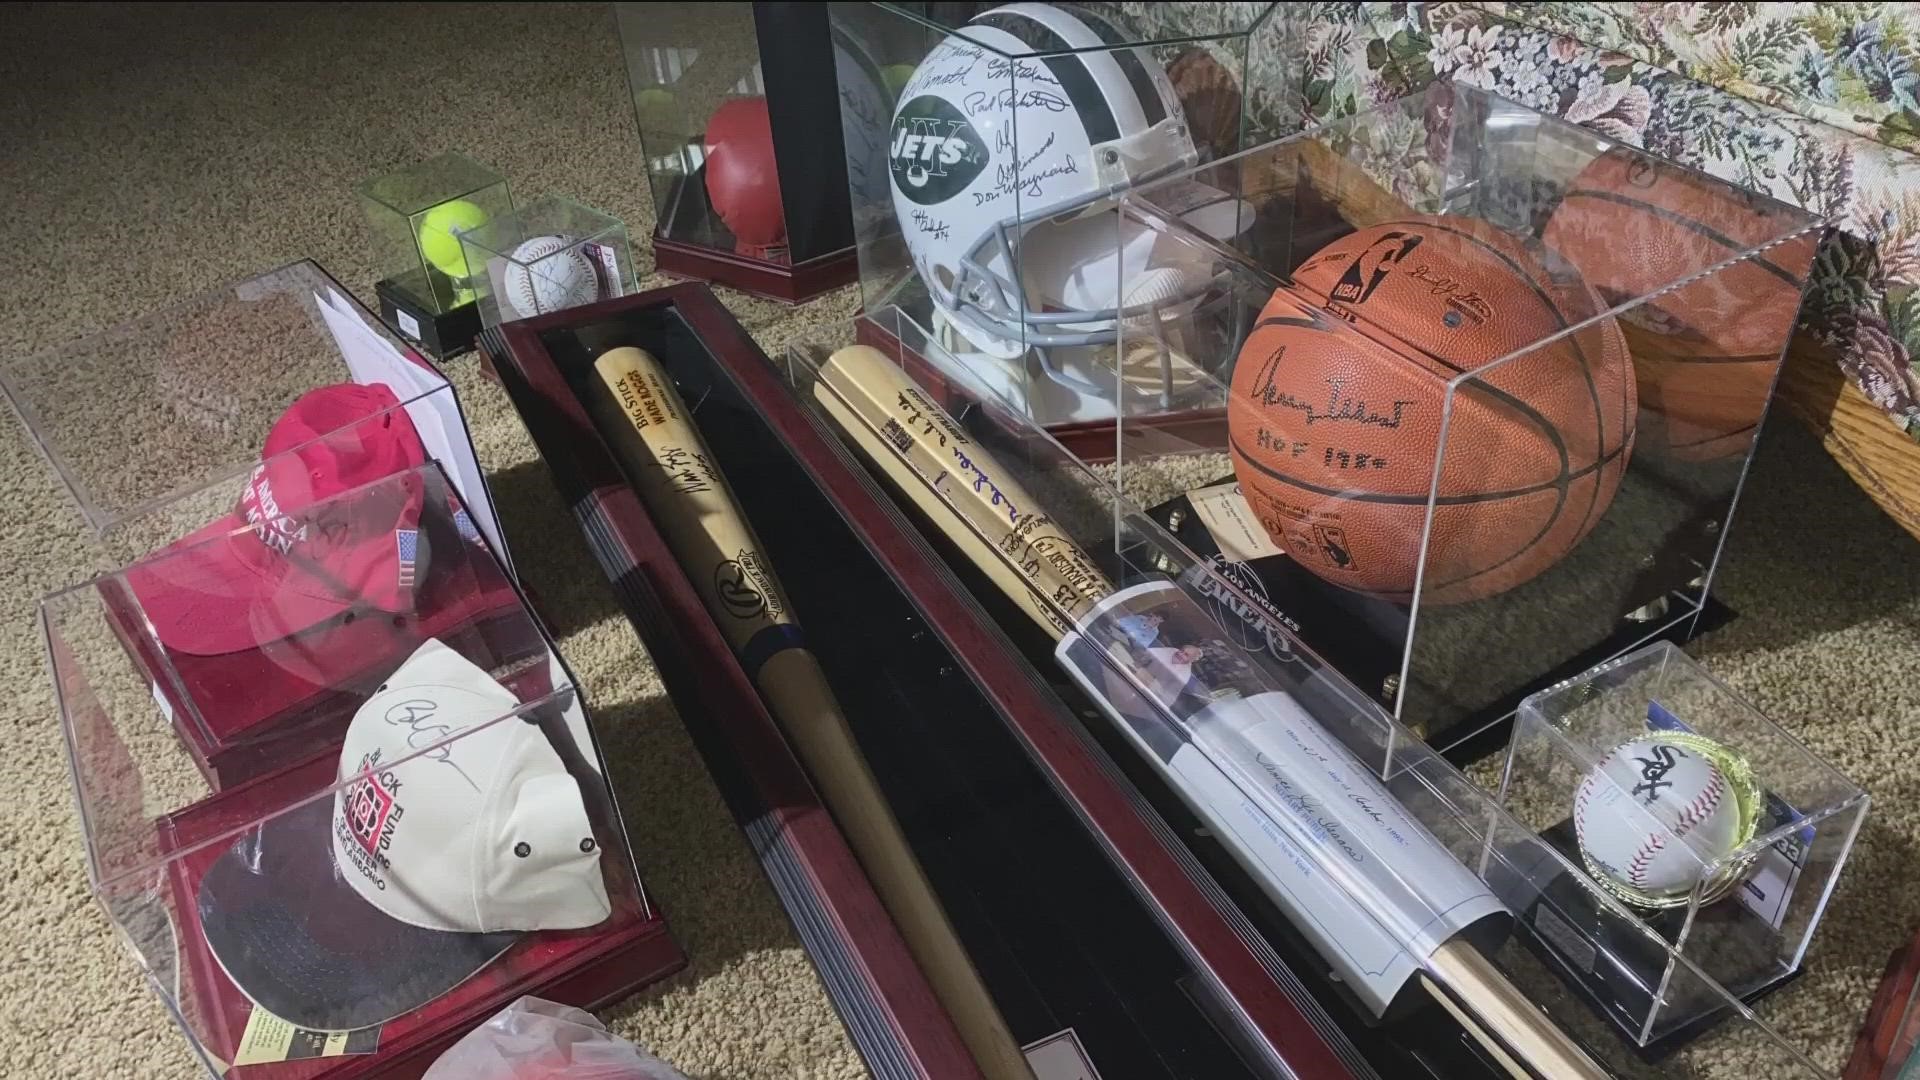 Gear signed by Michael Jordan, Mike Tyson, Brett Favre, Kobe Bryant and many stars will be auctioned off by Armed Services YMCA San Diego.